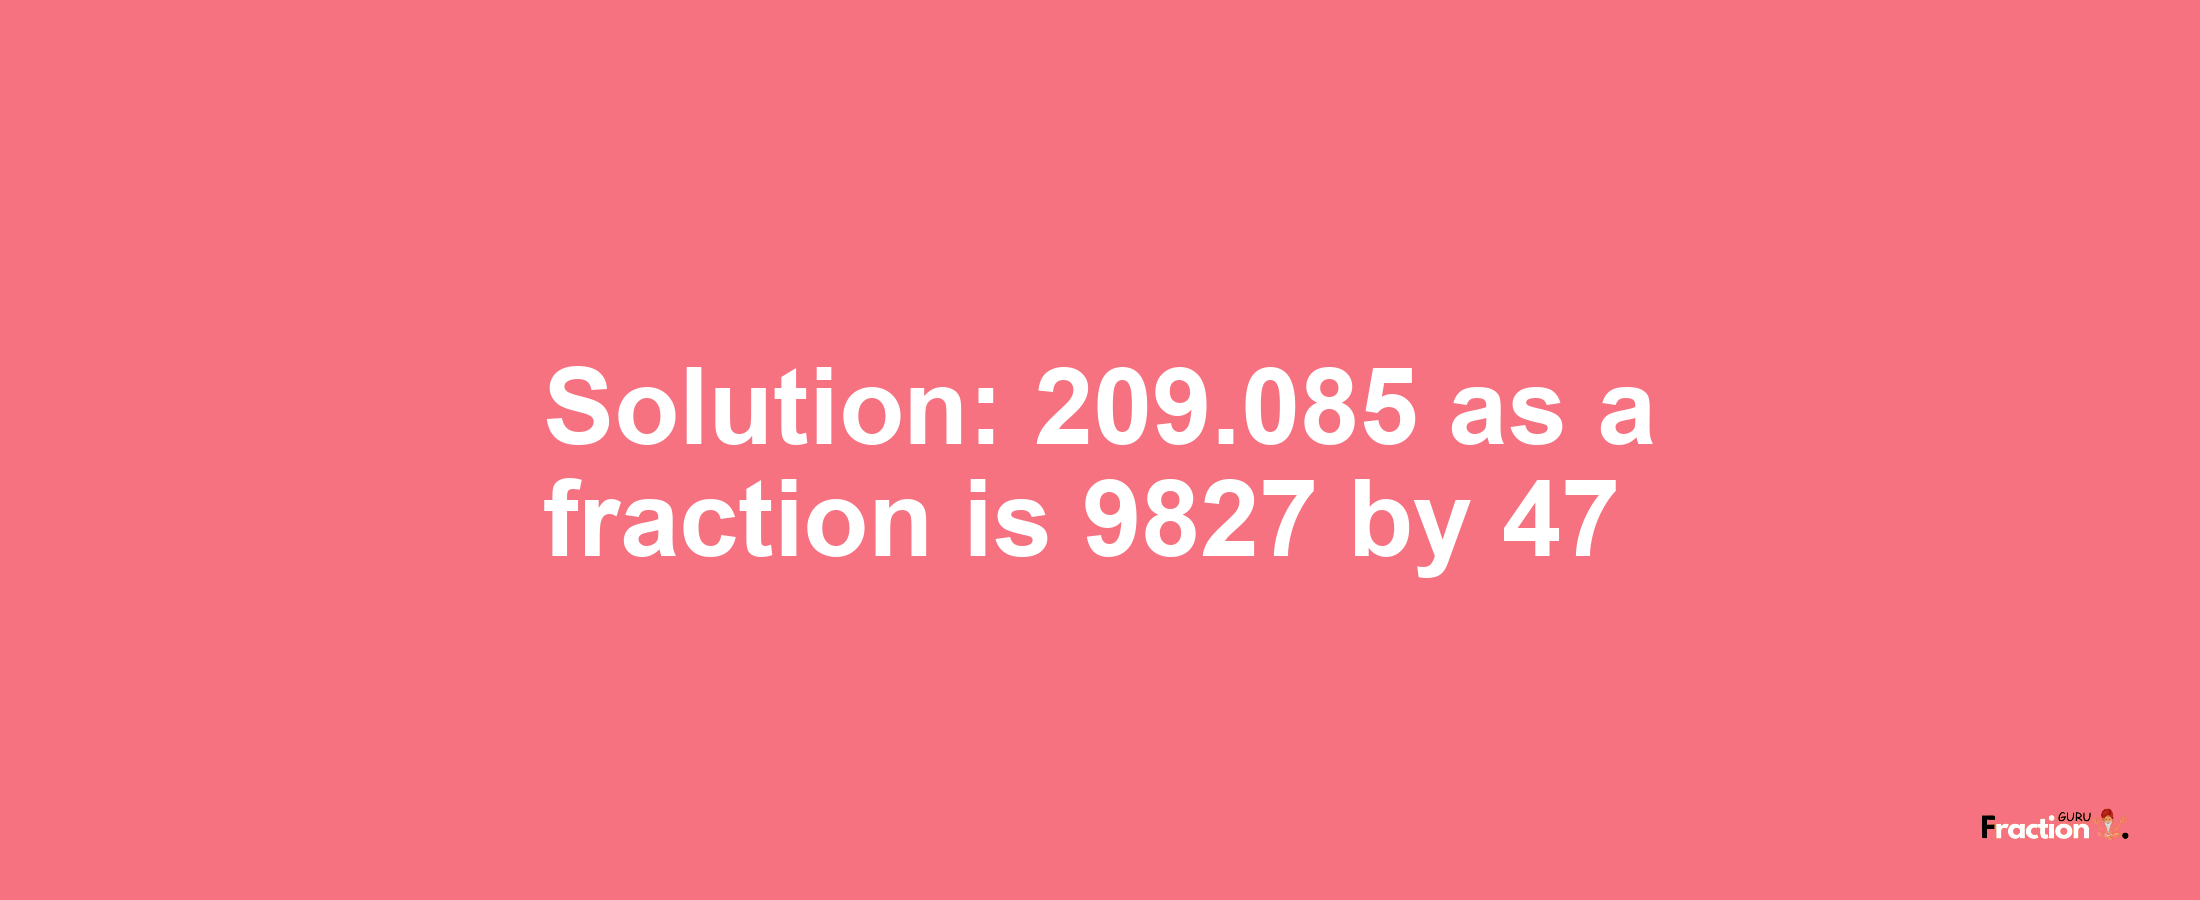 Solution:209.085 as a fraction is 9827/47